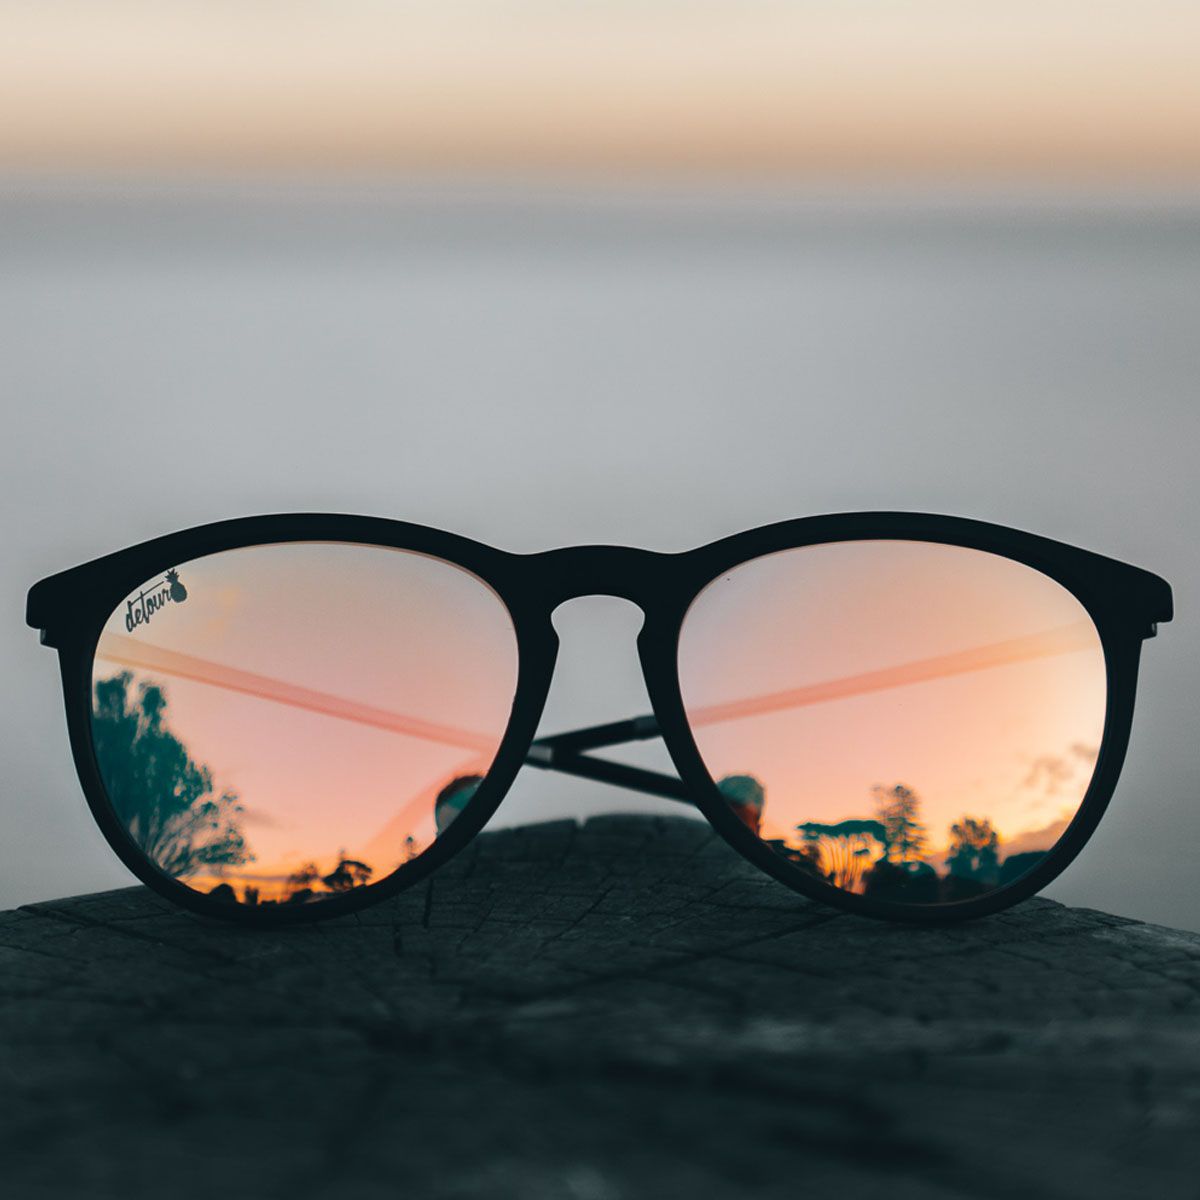 how detour sunglasses focused on community to grow its brand blog - image of sunglasses with a sunset in the reflection